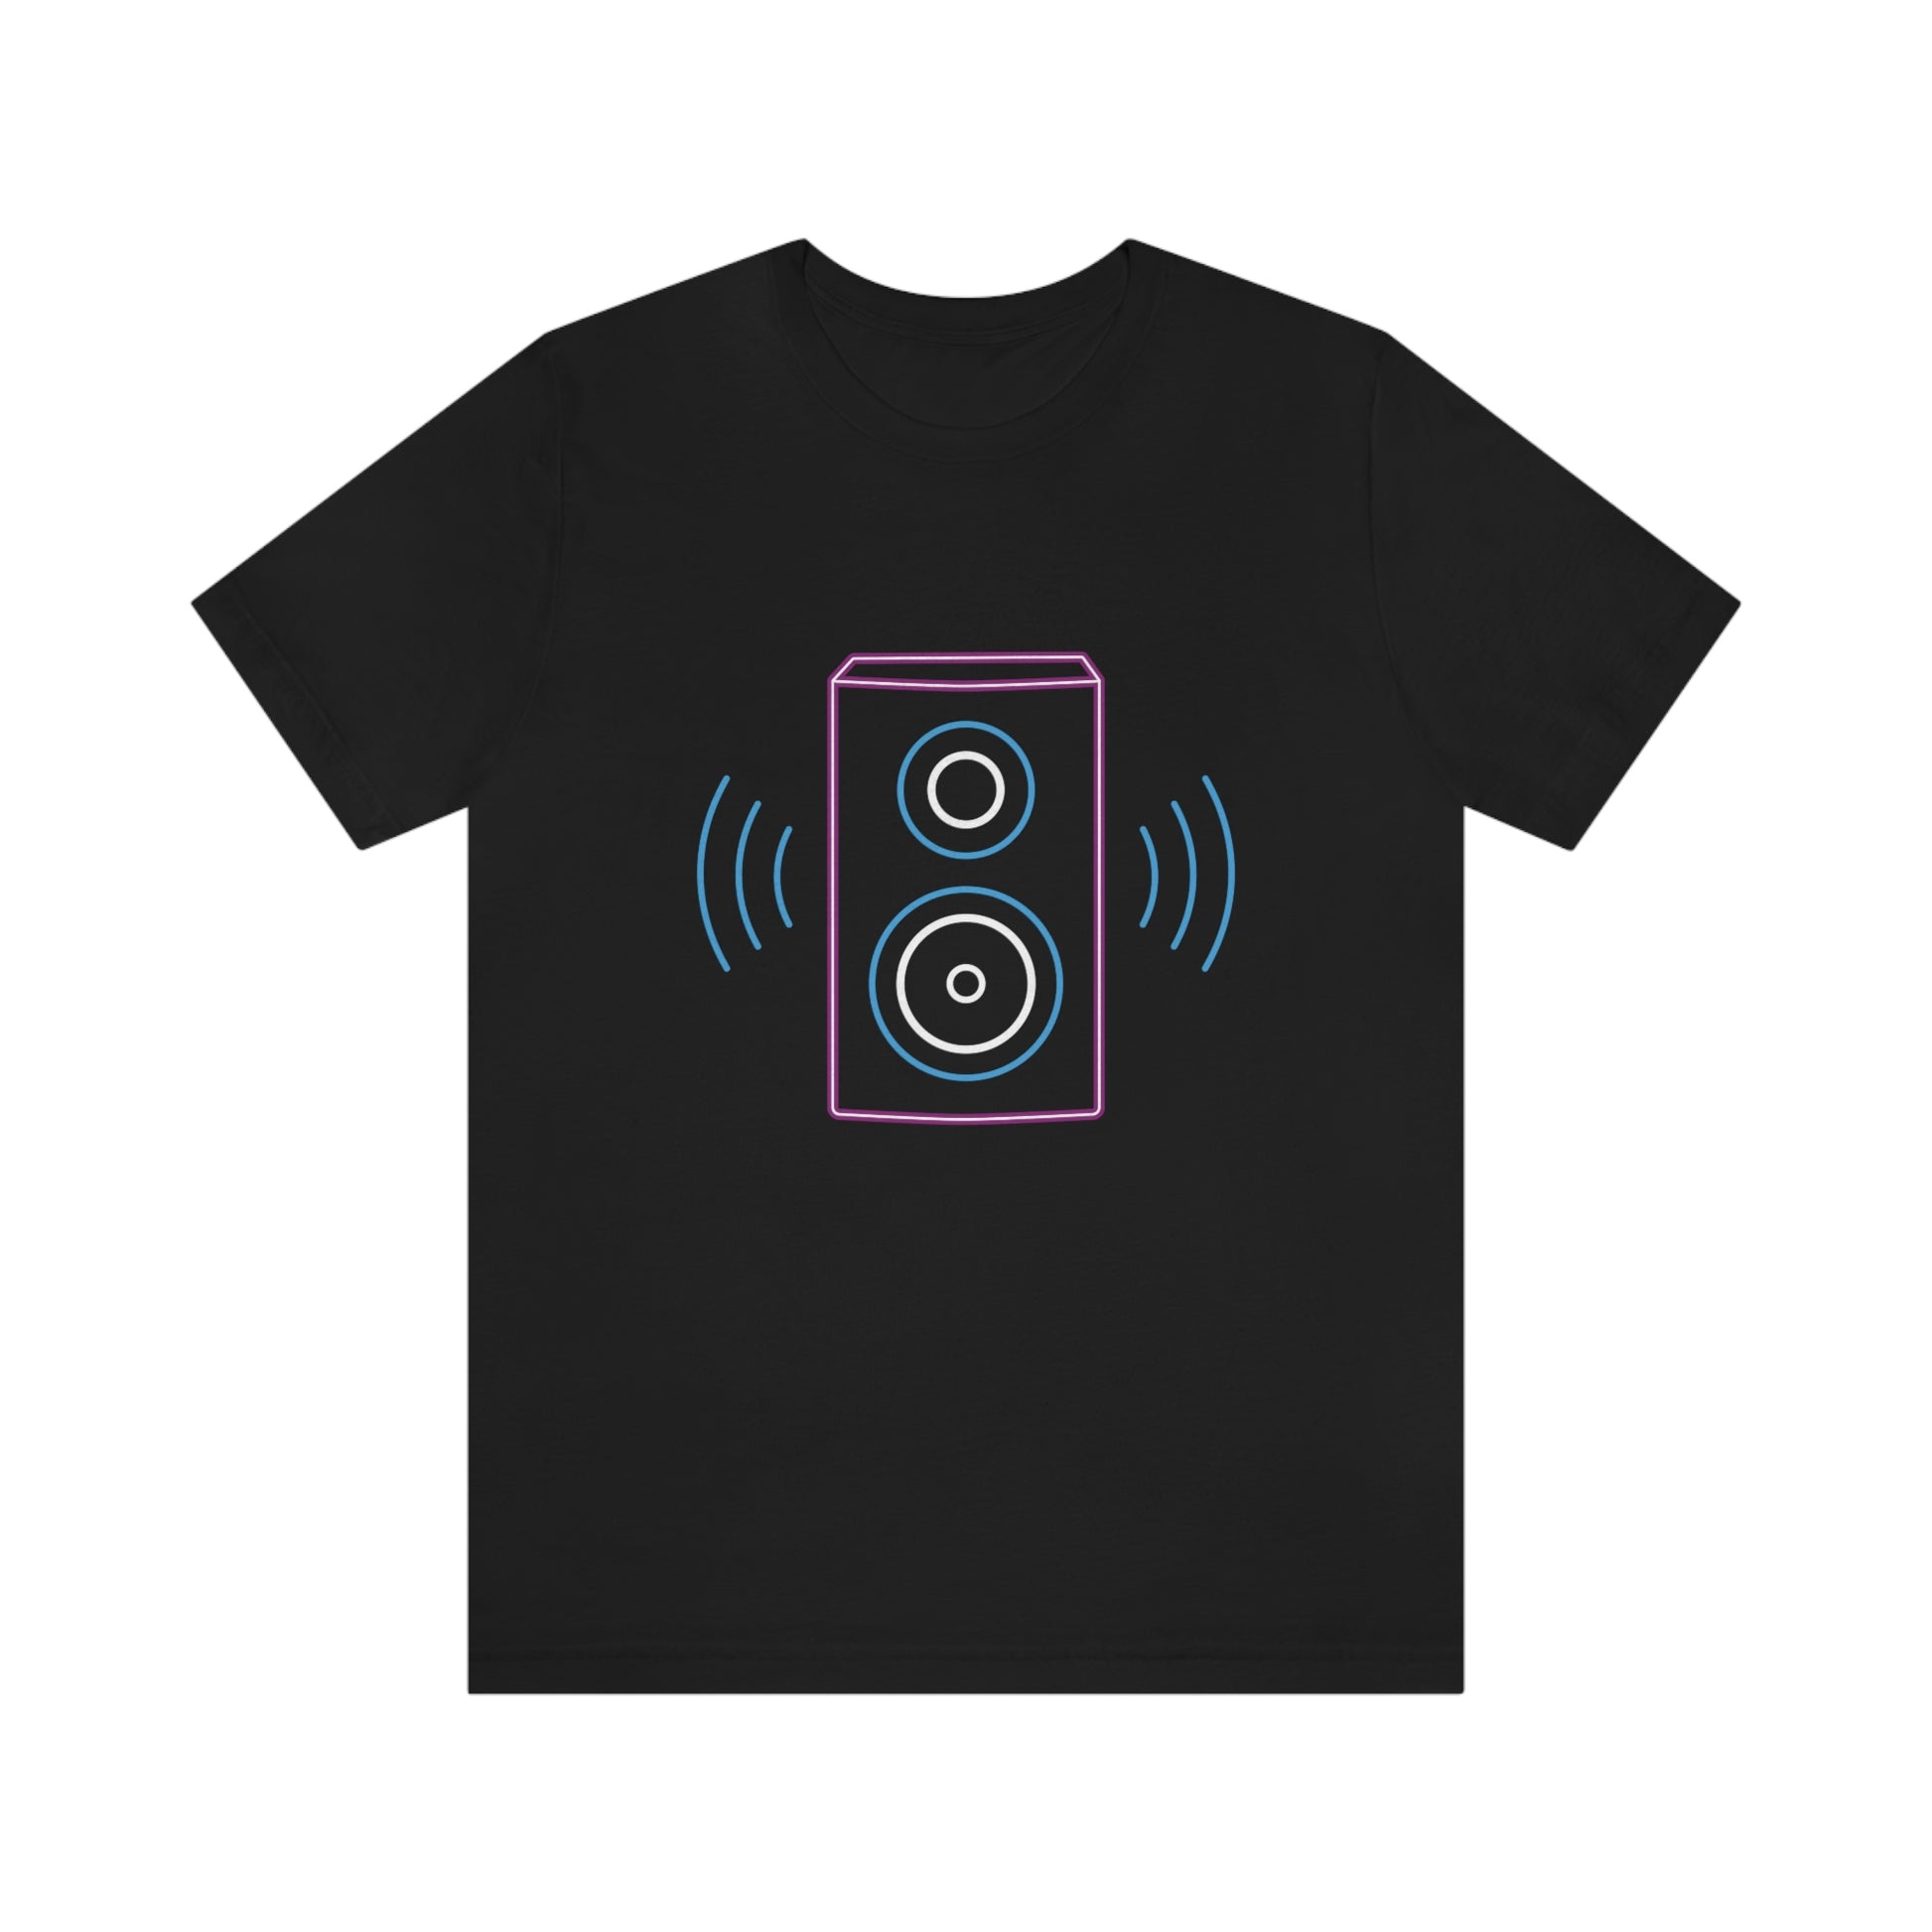 Black T-Shirt with vibrating neon sound speaker design. Taken from the TEQNEON Music Box collection.